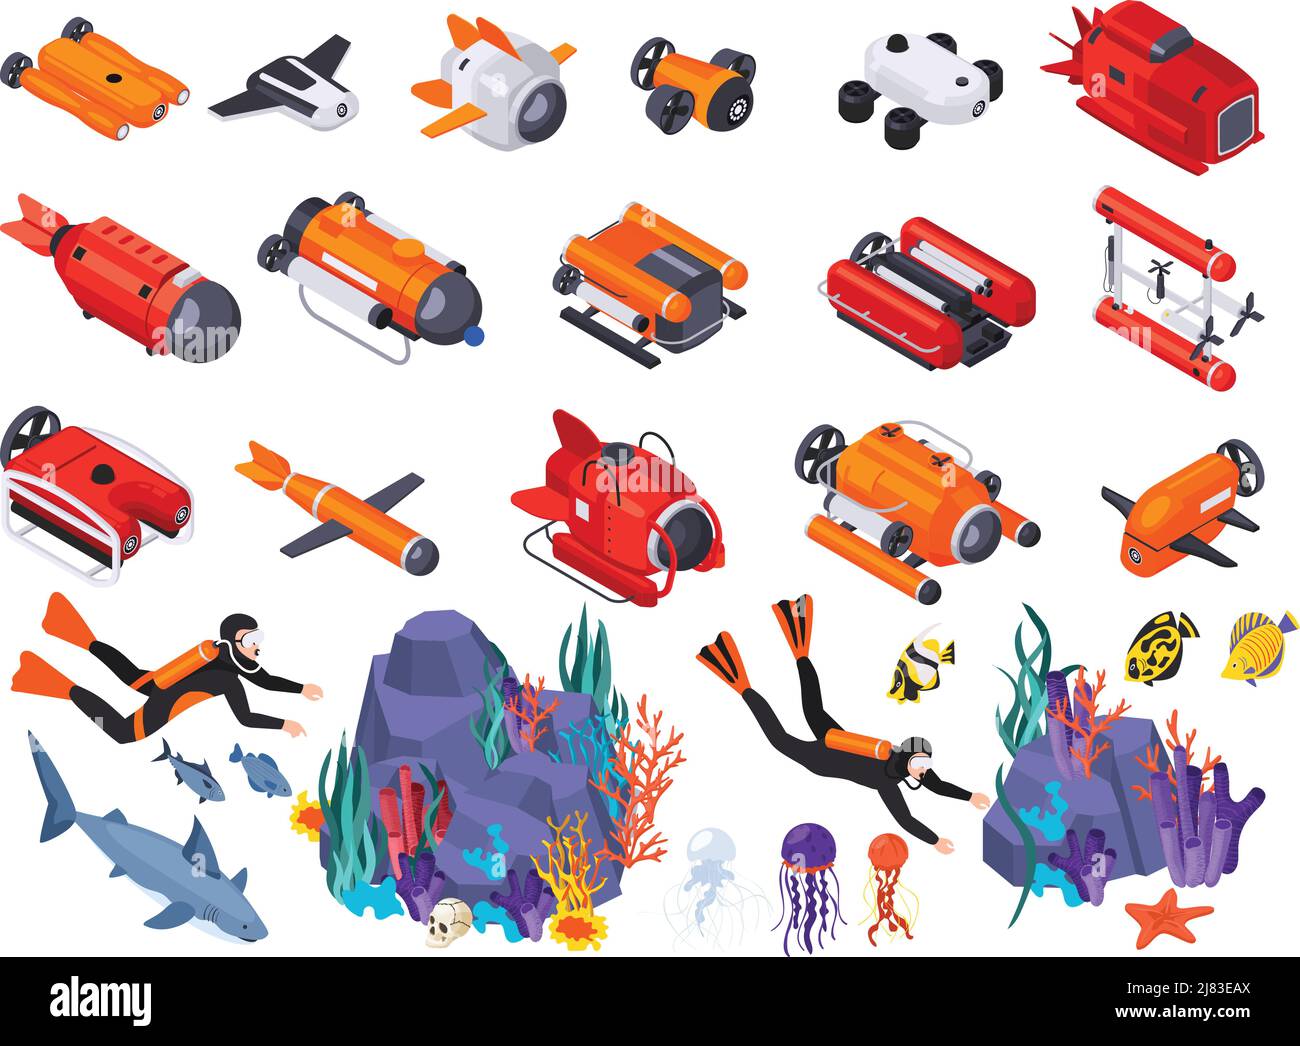 Underwater vehicles machines equipment isometric isolated icon set with divers fish different tools and underwater ships vector illustration Stock Vector